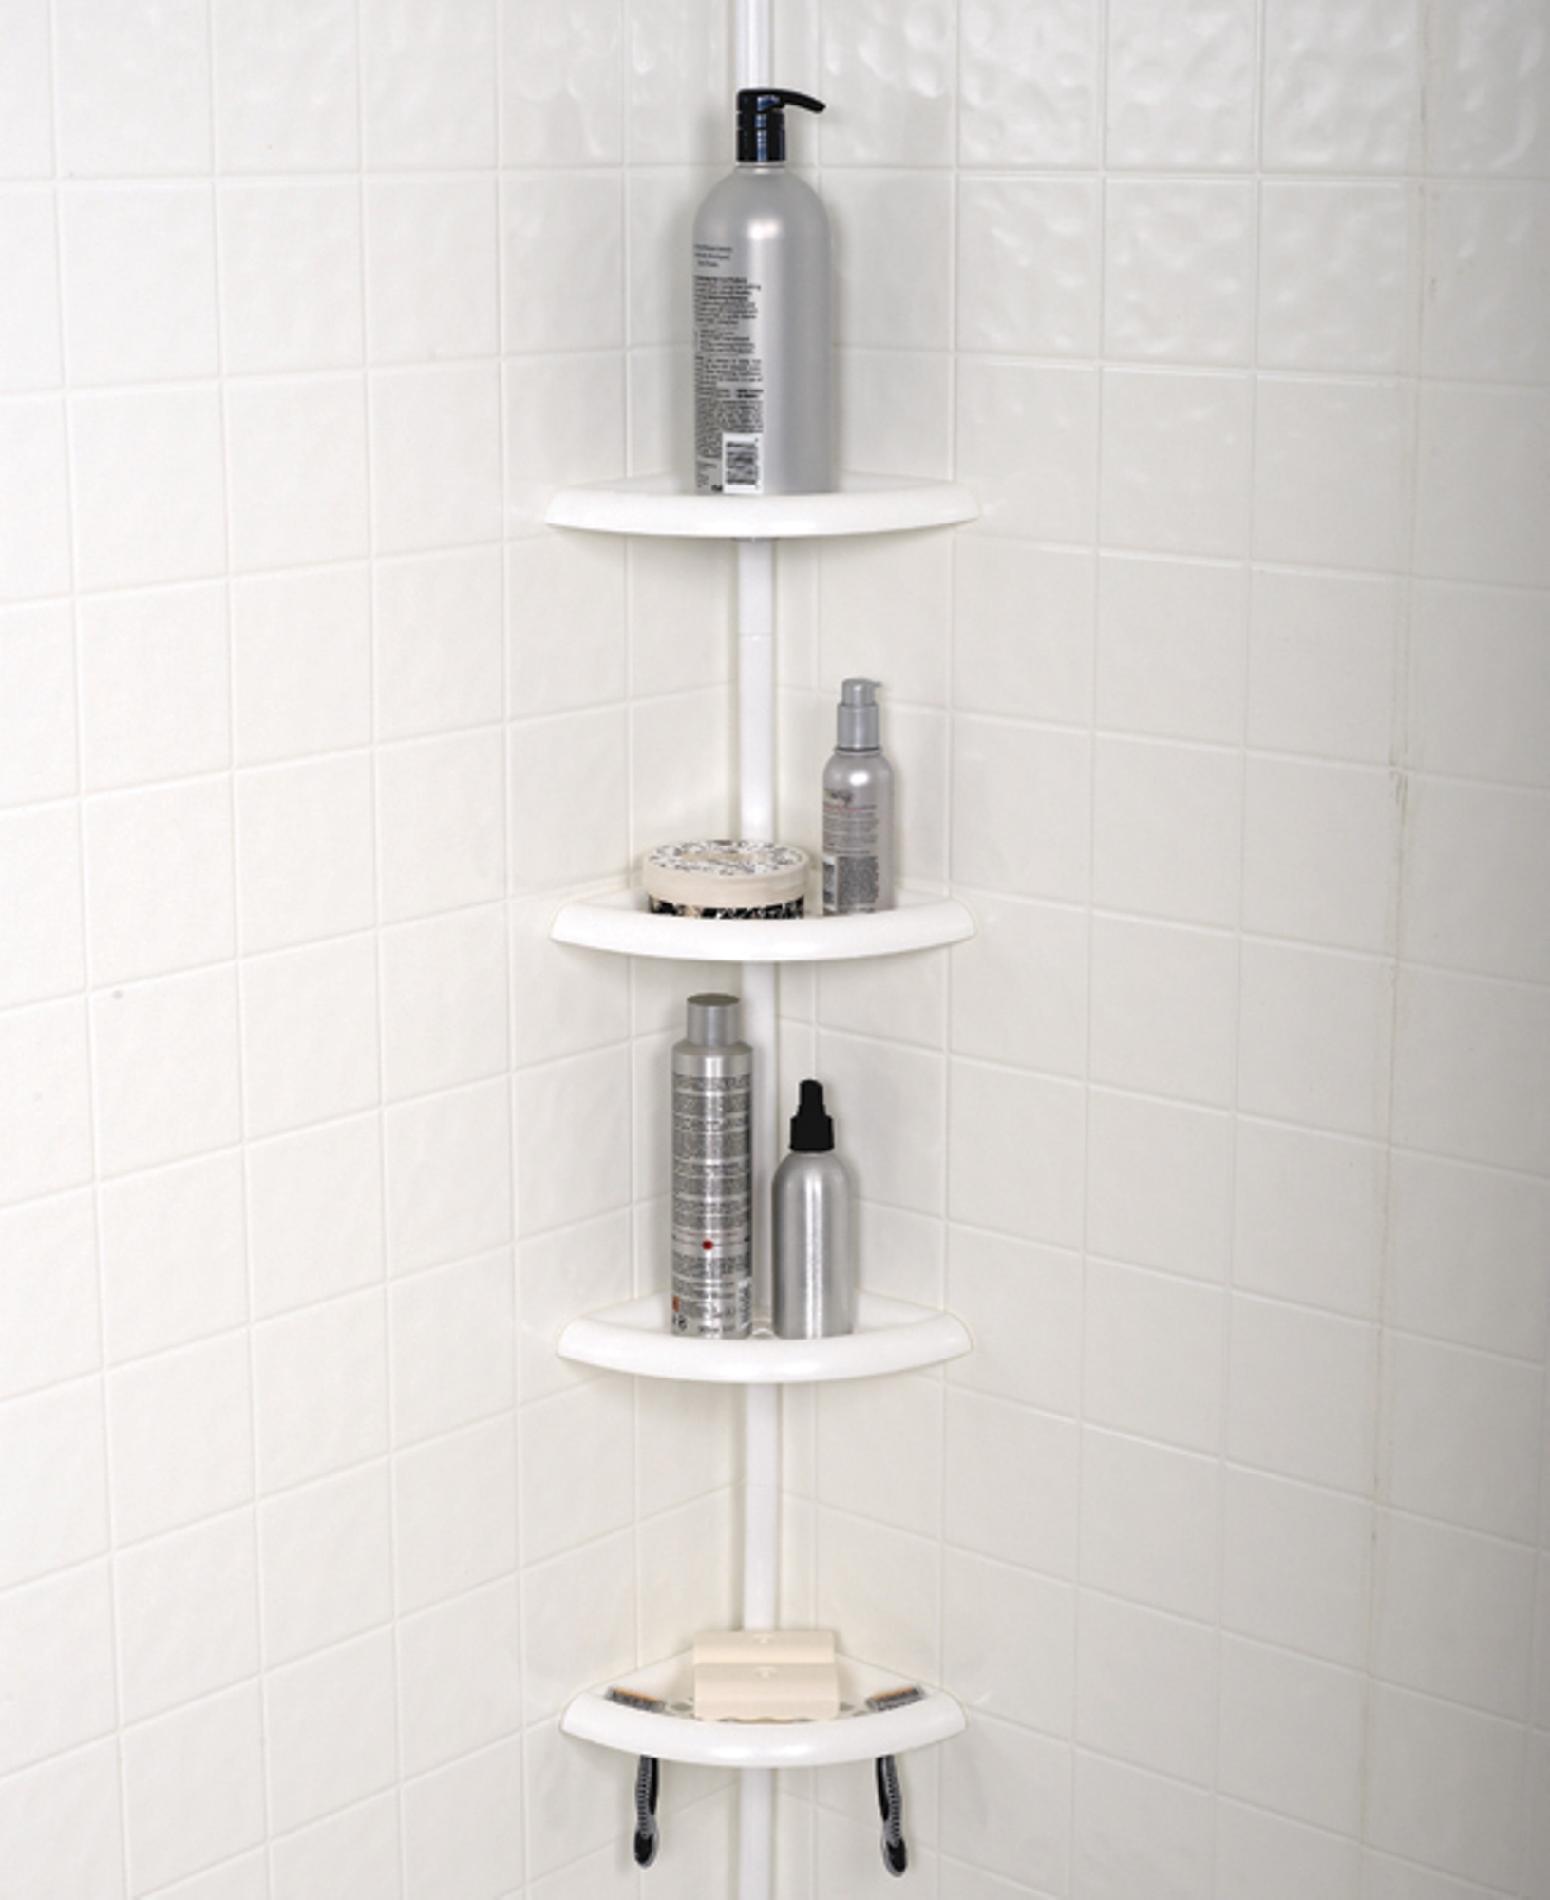 Tub And Shower Tension Pole Caddy, Zenna Home 2104w Bathtub And Shower Tension Corner Caddy White